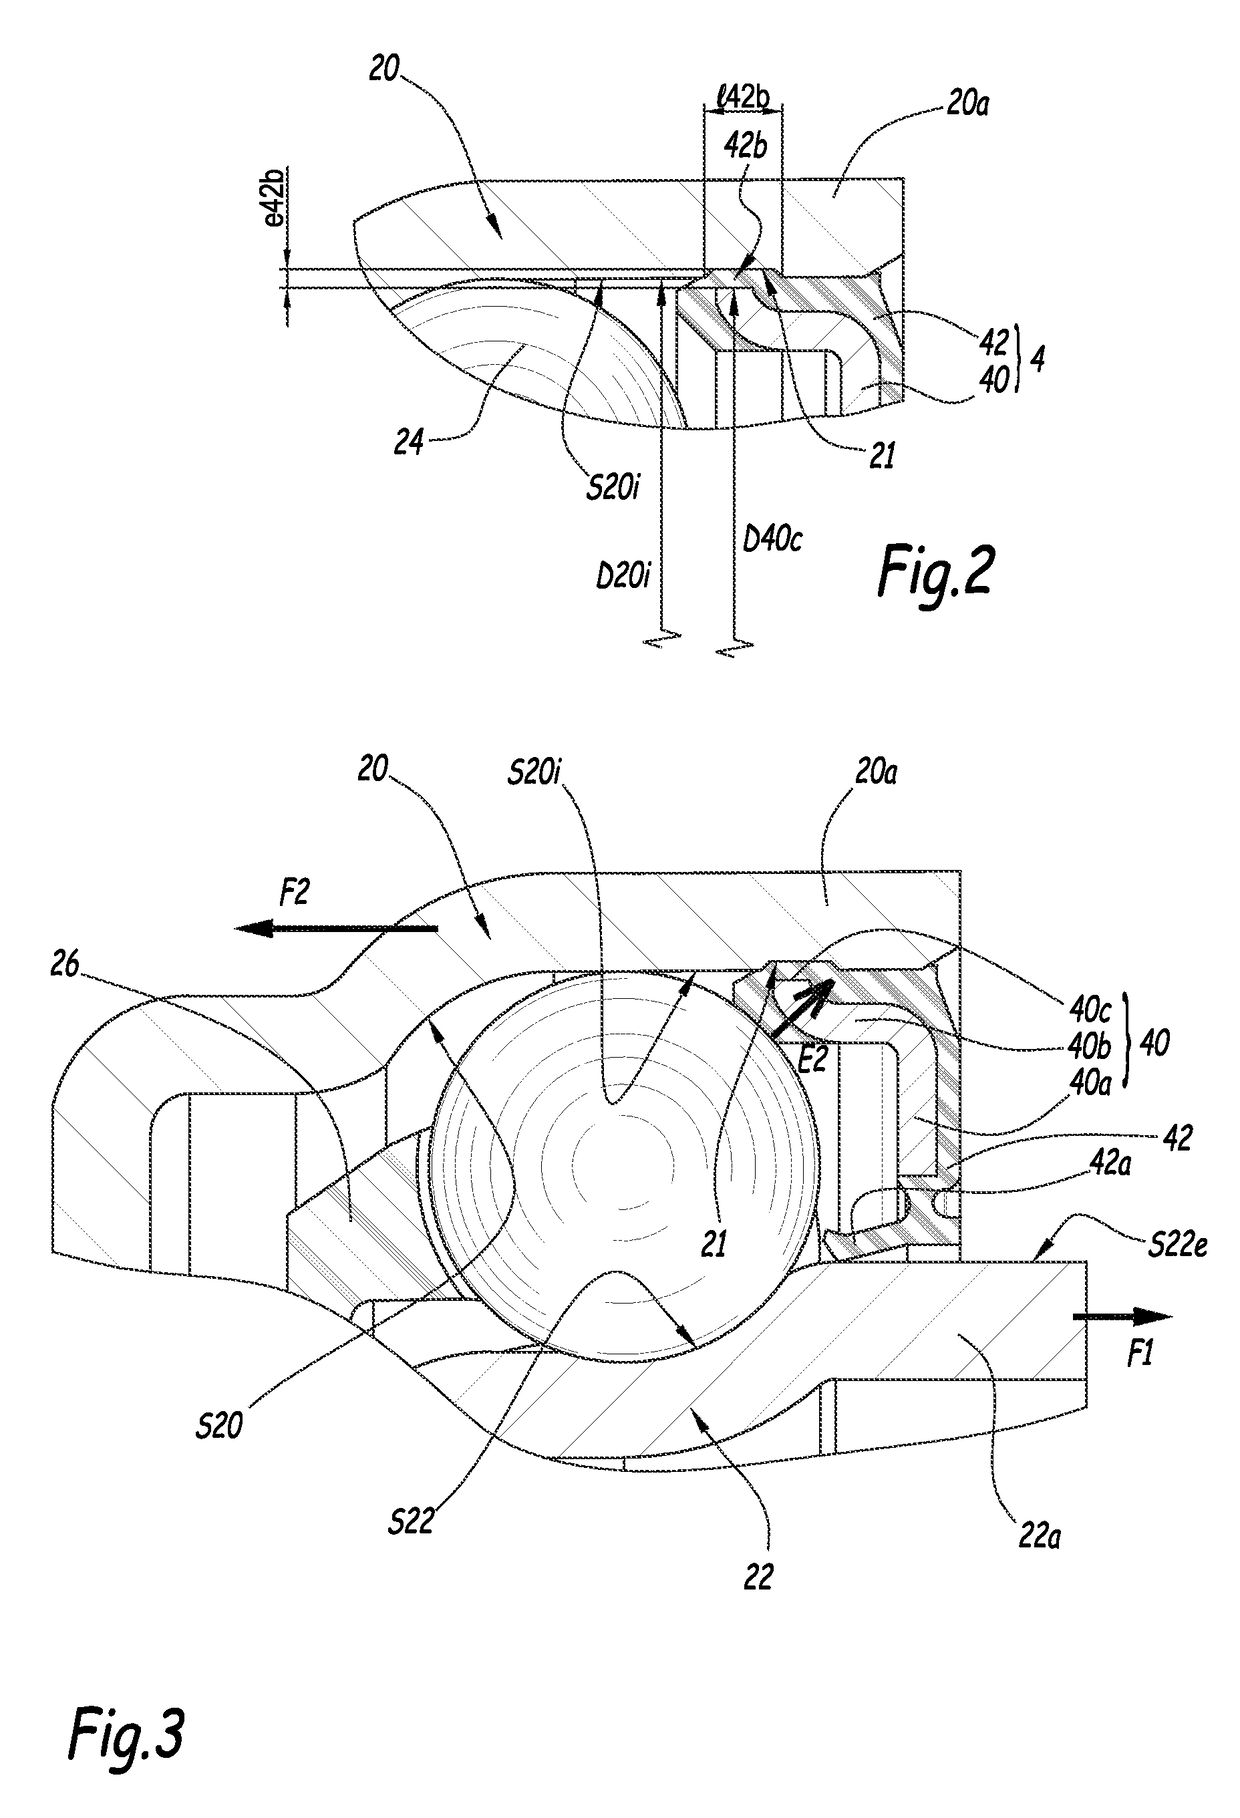 Engagement-disengagement, suspension or steering release bearing, and motor vehicle equipped with such a release bearing